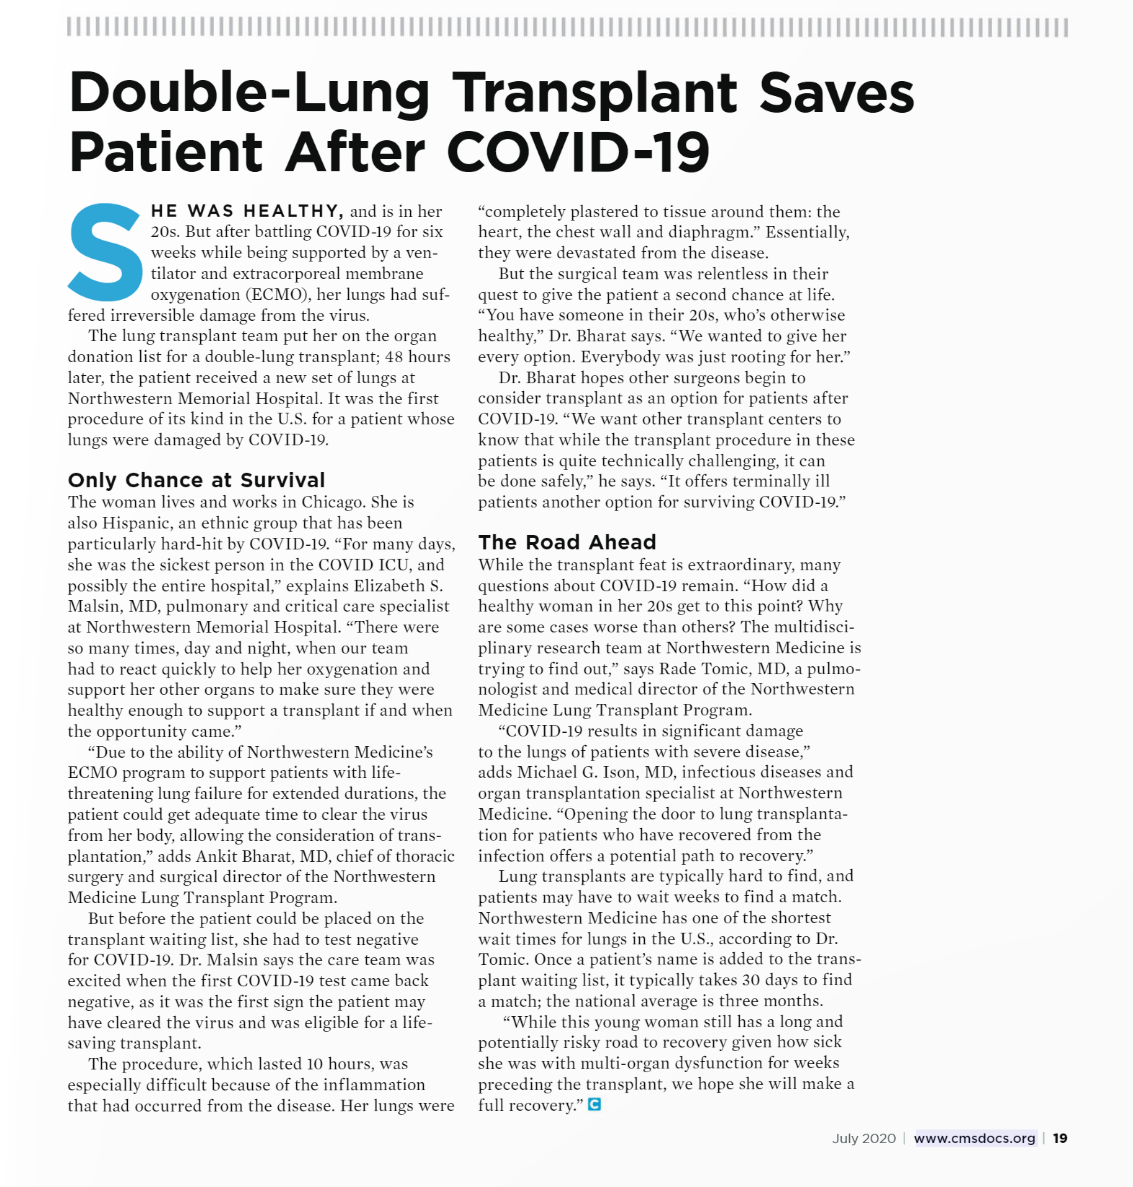 Double-Lung Transplant Saves Patient After COVID-19